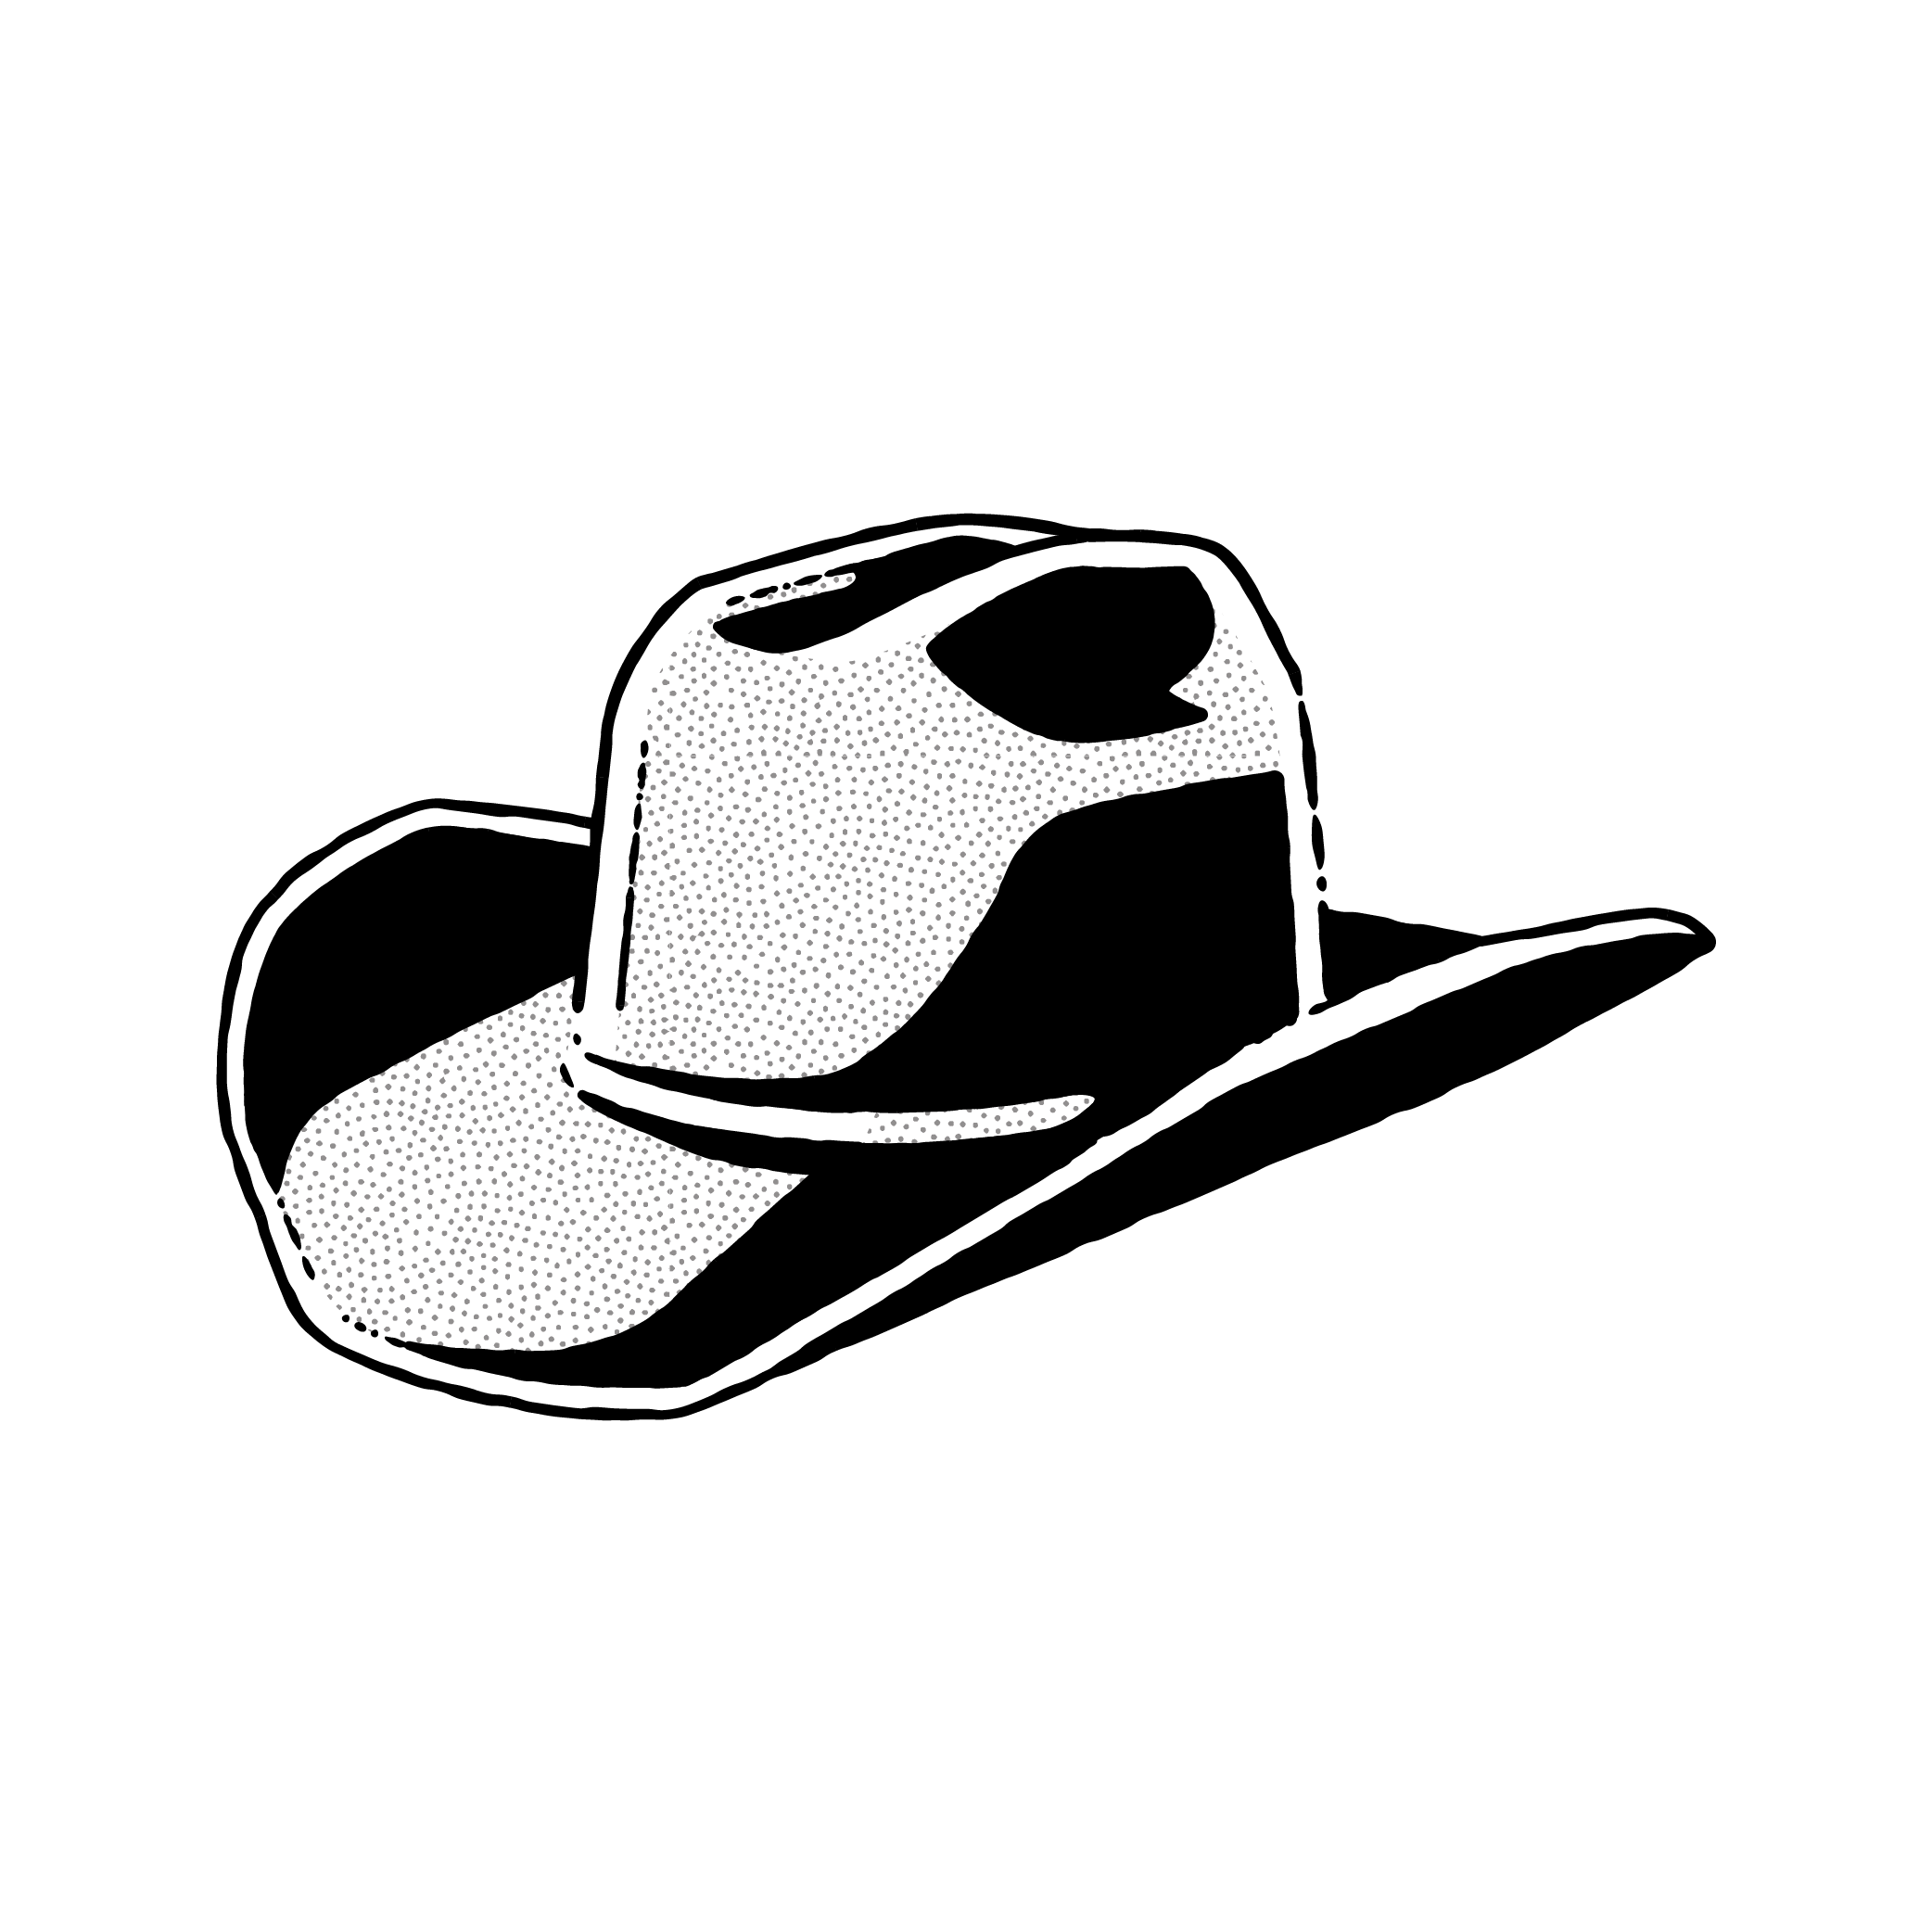 A black and white illustration of a cowboy hat with a wide brim and a high crown. The image has a textured, stippled shading style, giving it a rustic and classic look, set against a plain black background.